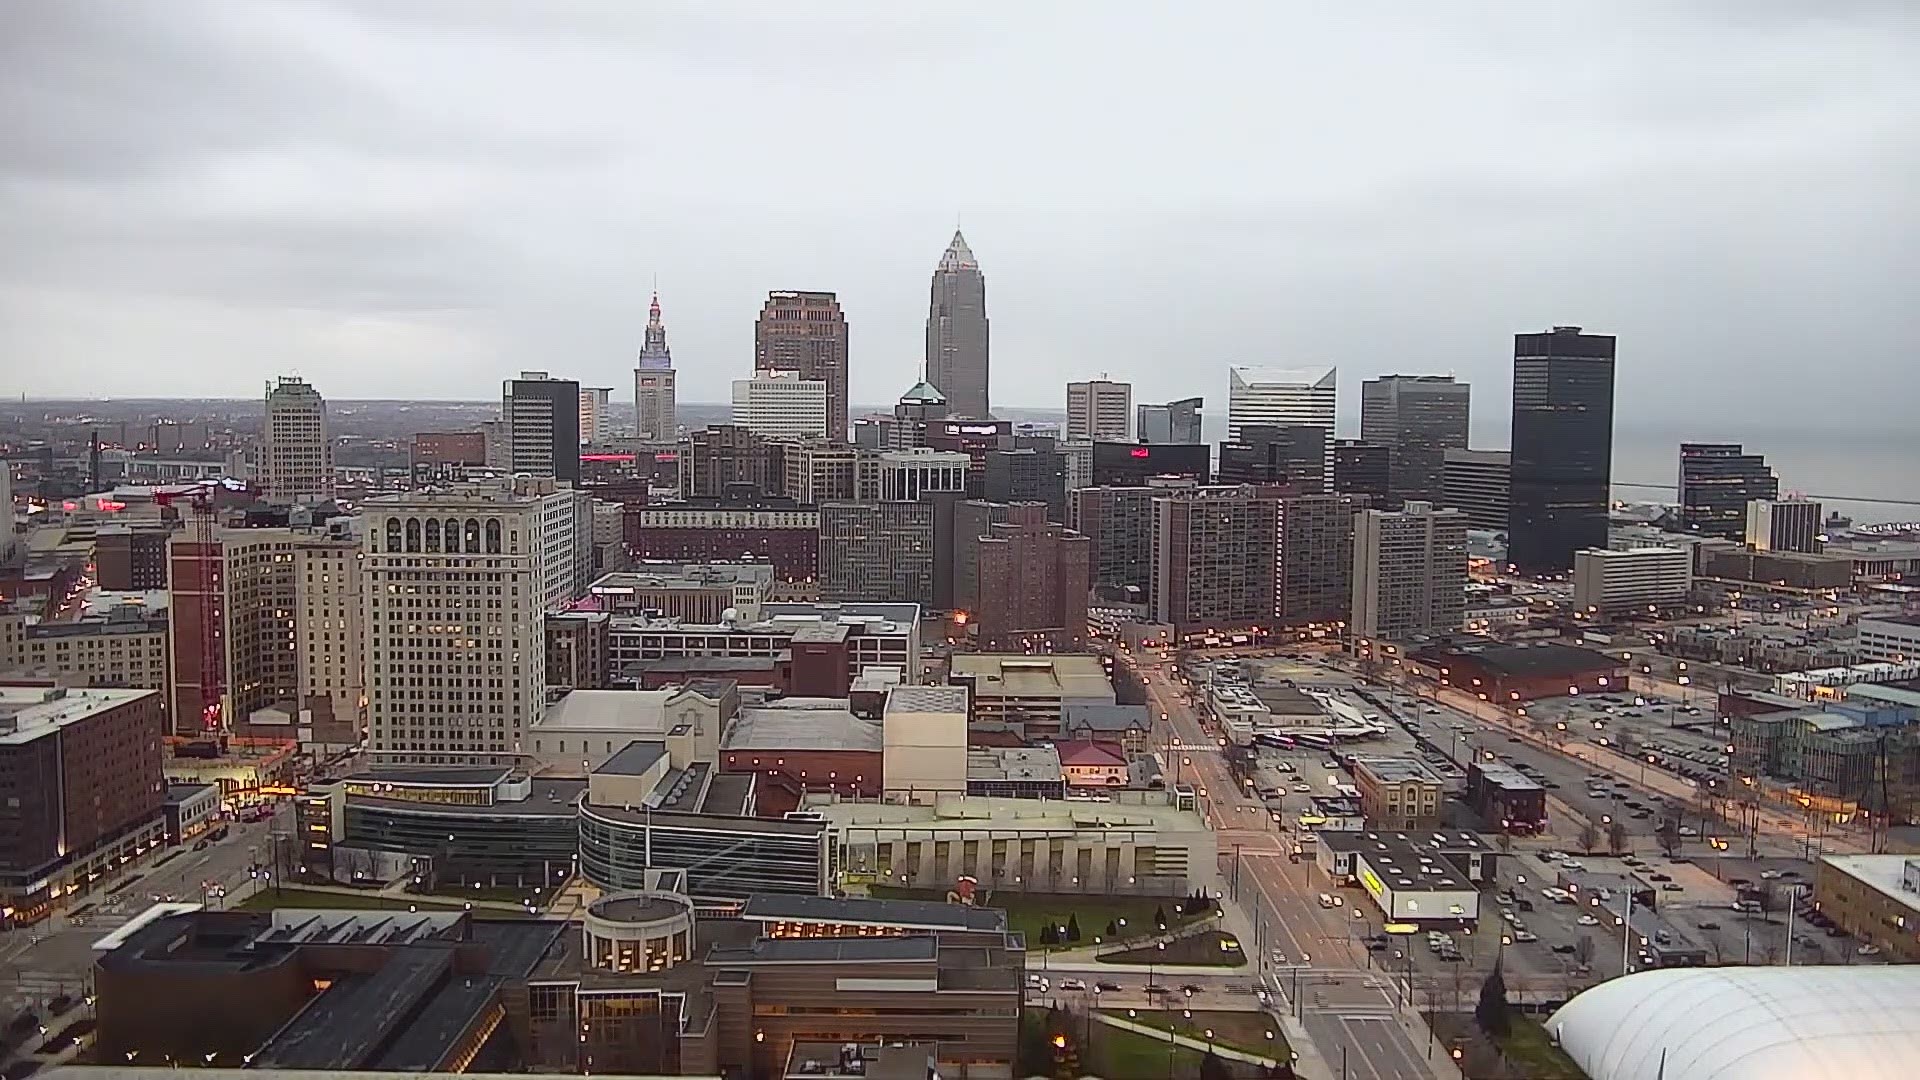 Here's today's all day Cleveland weather time-lapse for Friday. #3weather